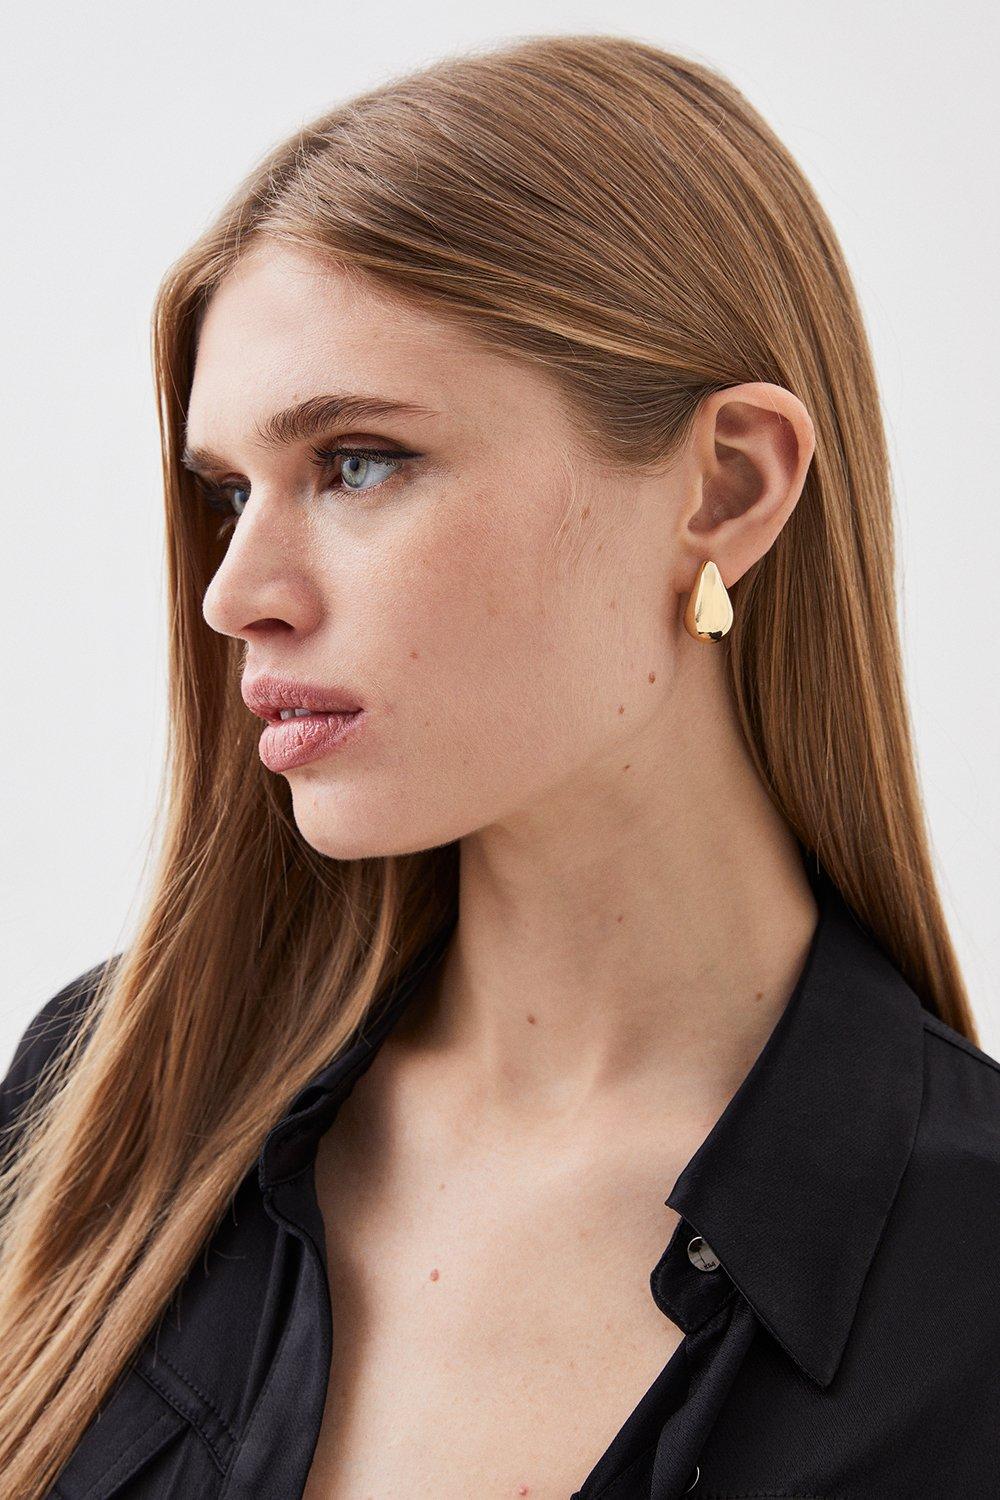 Flat Earring Post Earring Findings for sale, Shop with Afterpay